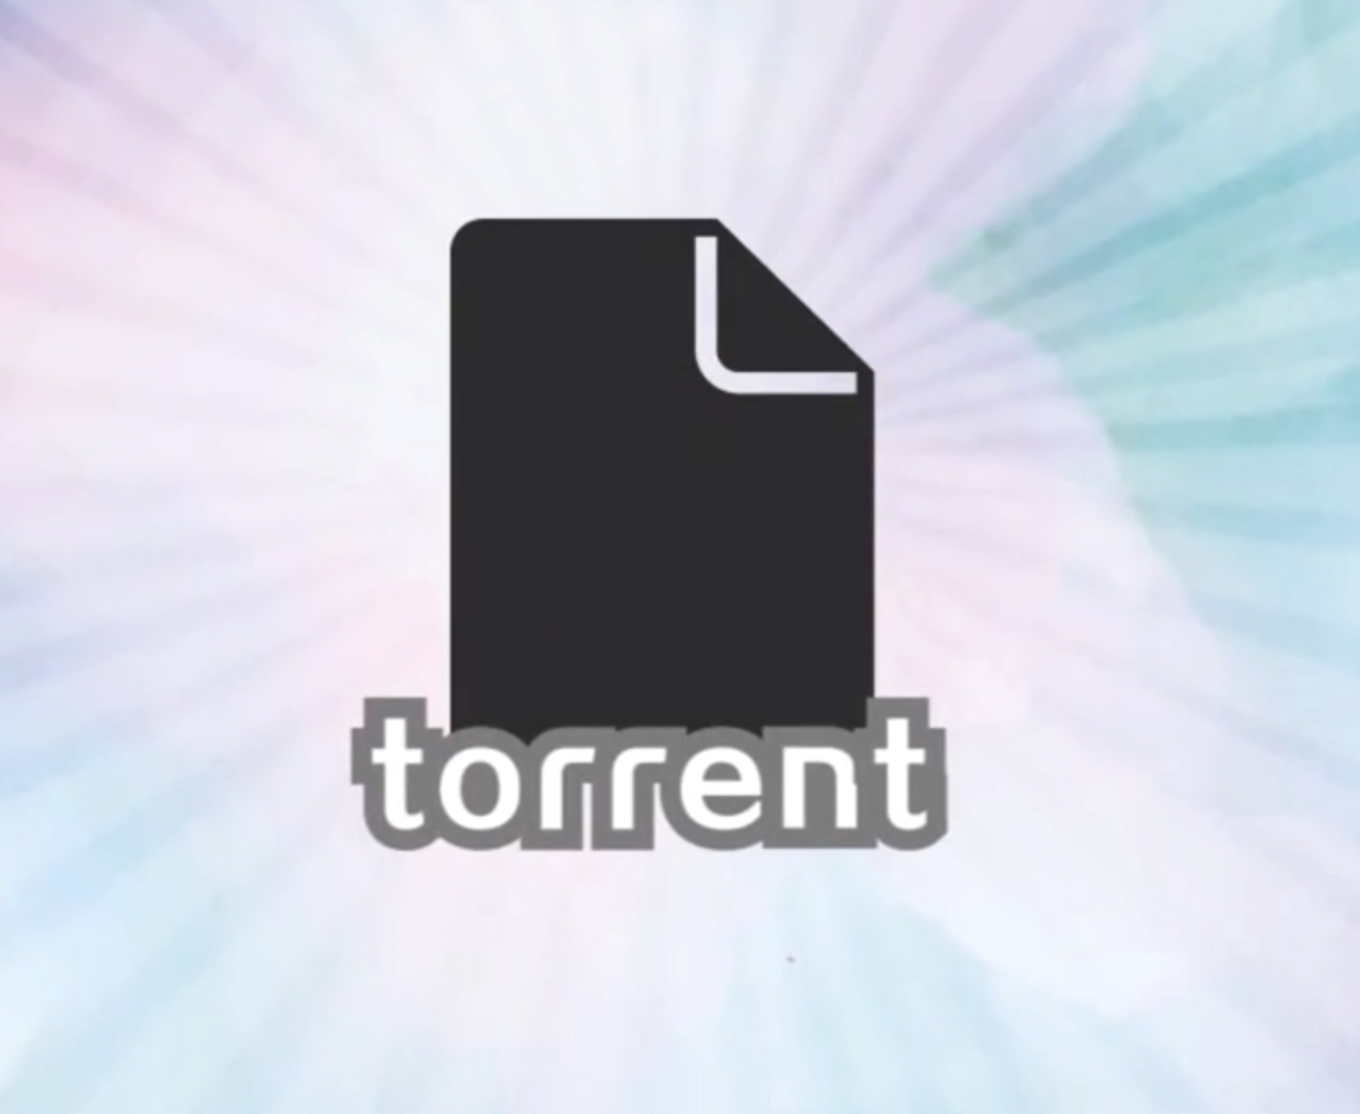 what are torrents?